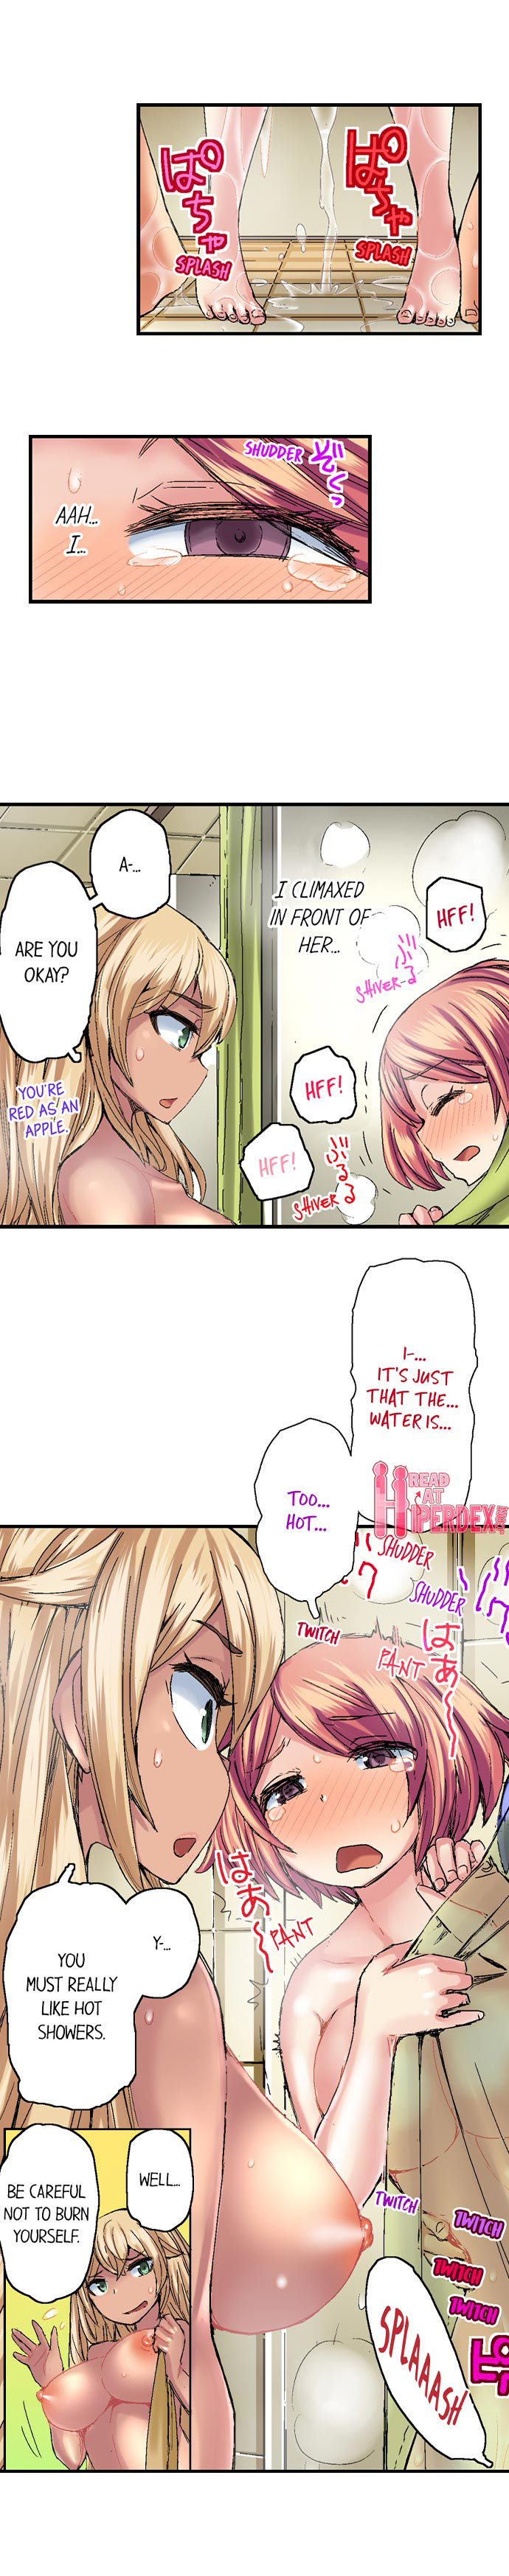 Taking a Hot Tanned Chick’s Virginity - Chapter 15 Page 4